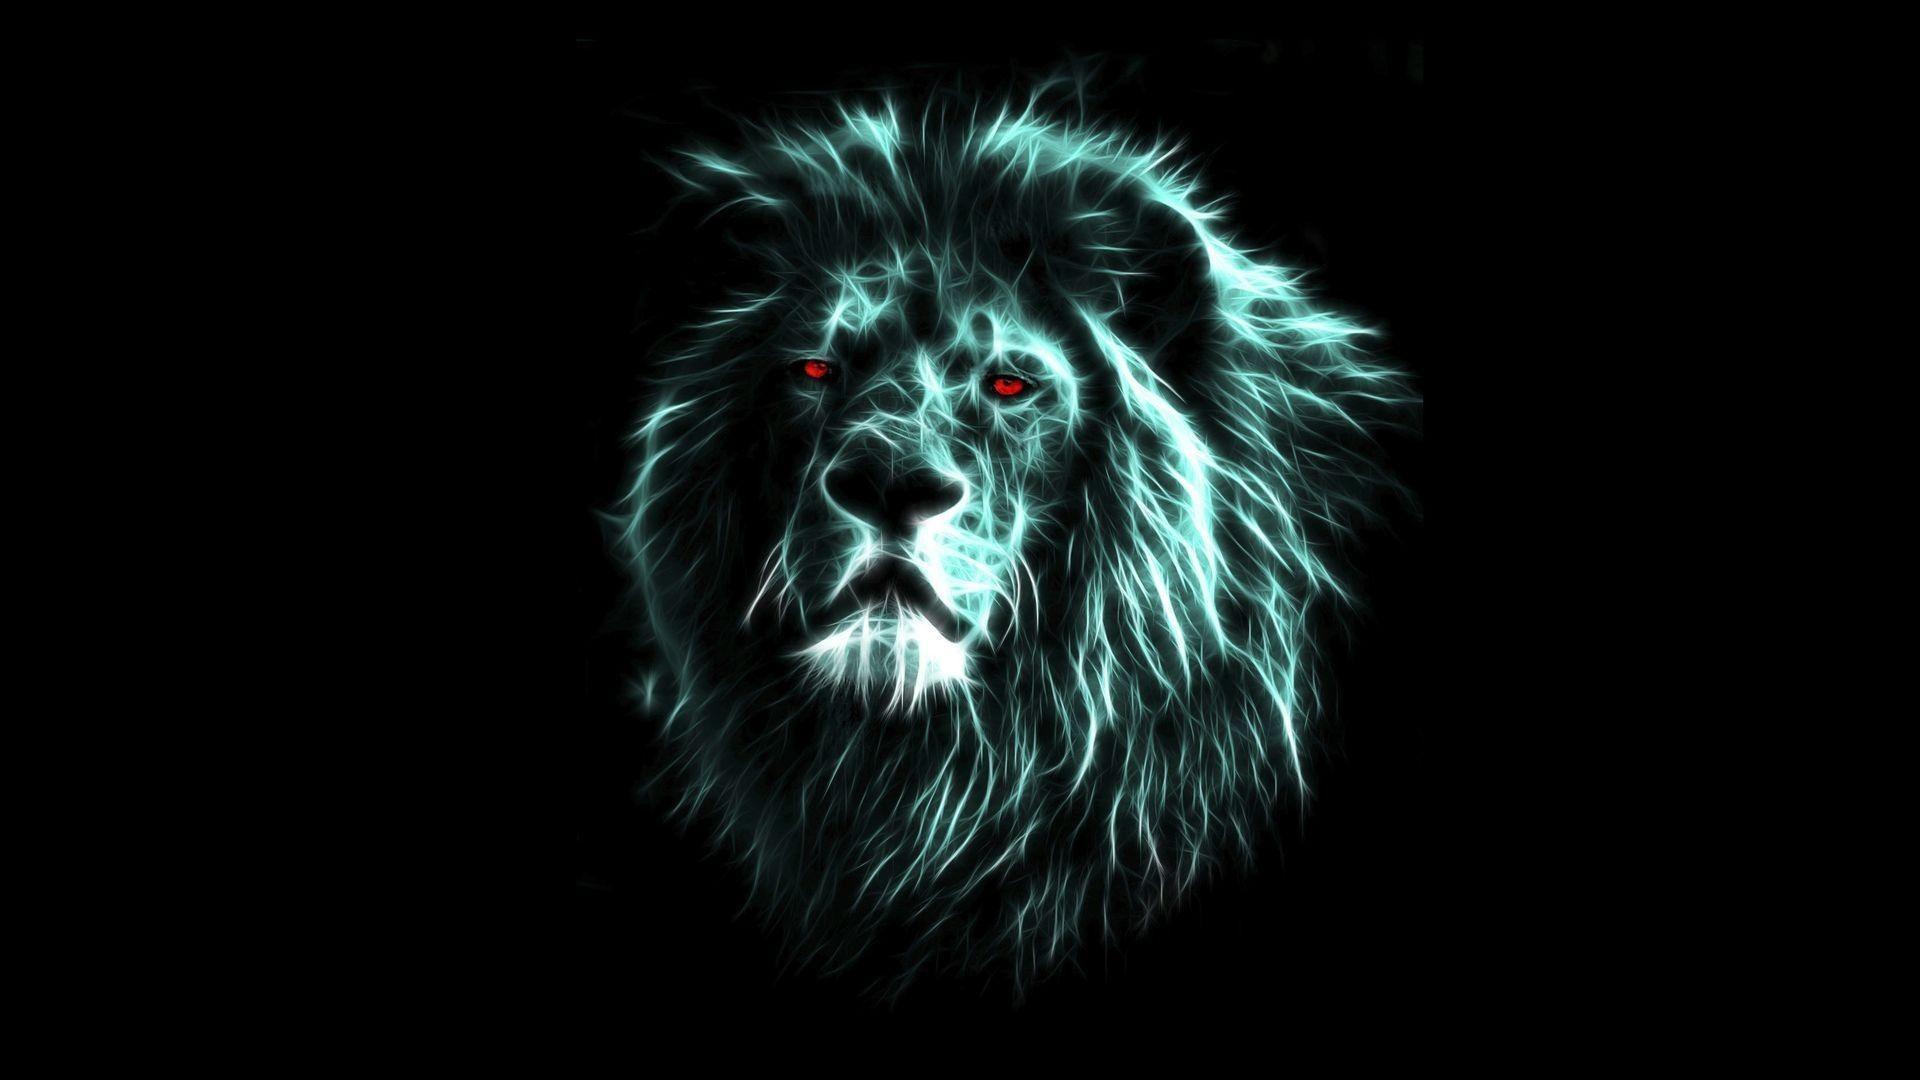 3D Lion Wallpaper 1280x1024 Save Best New Refrence Fresh